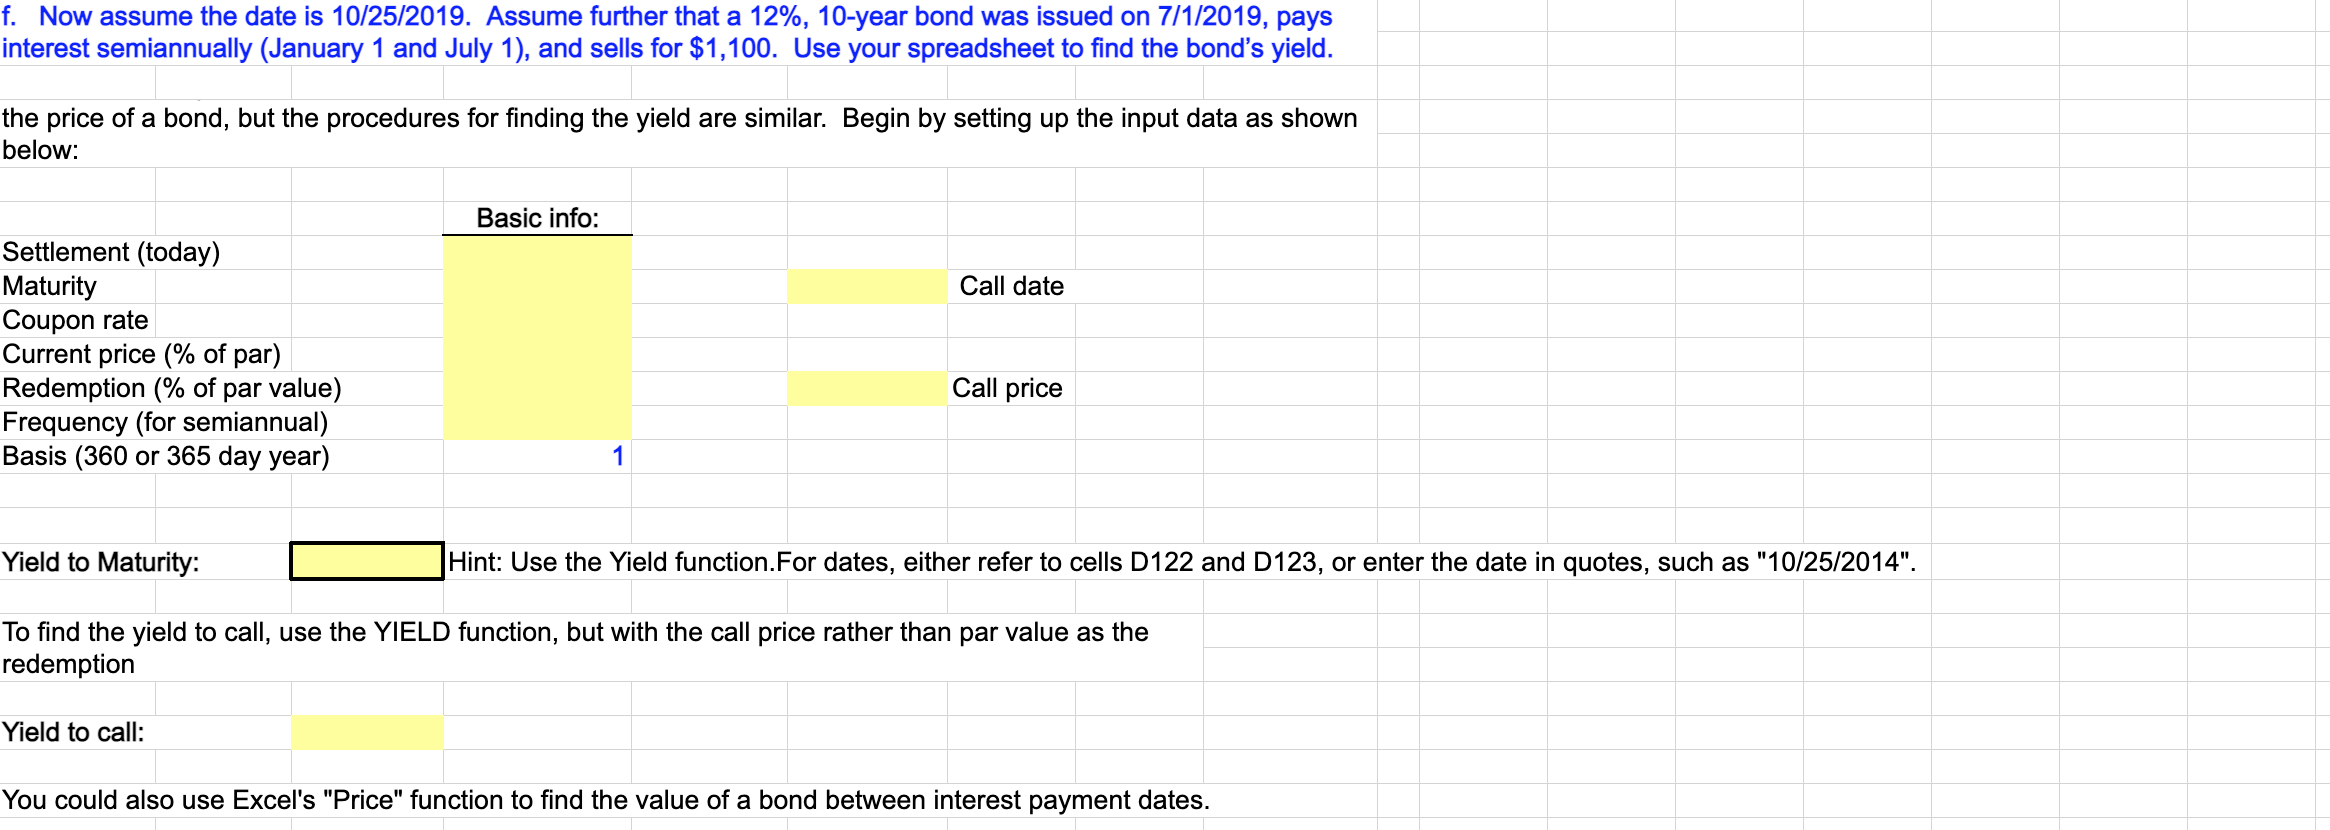 e. How would the price of the bond be affected by